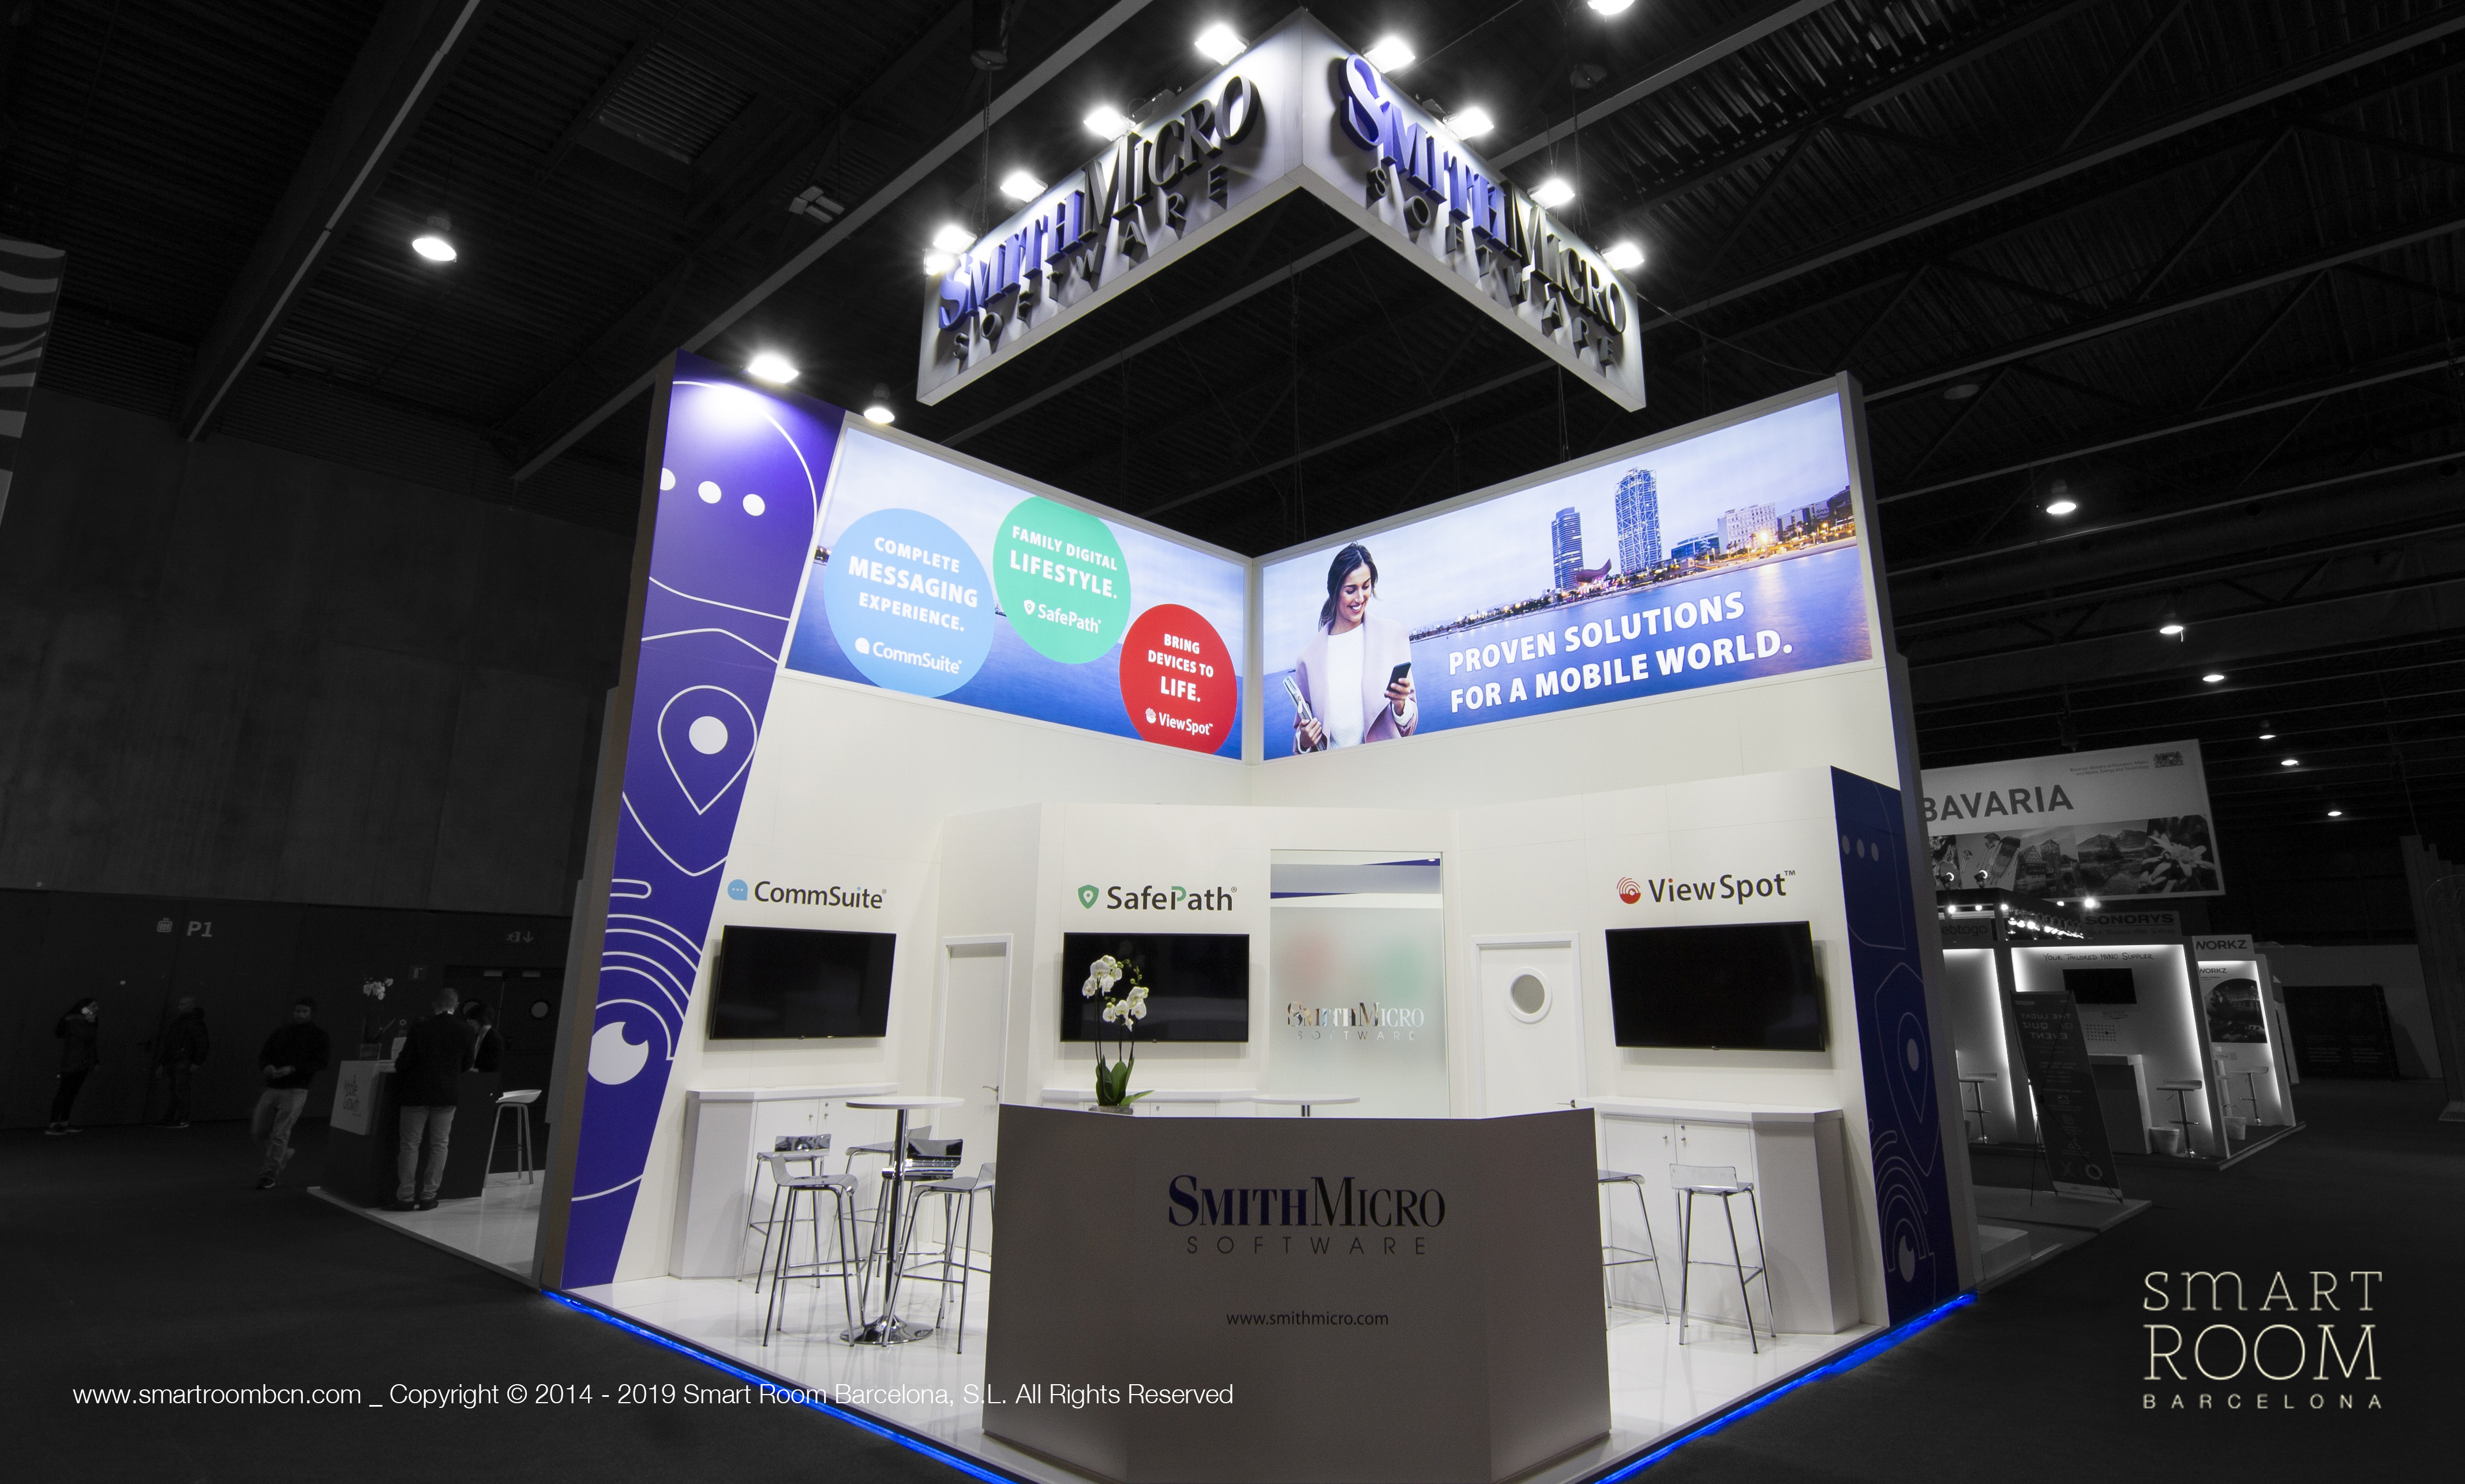 Stand for Smith Micro at MWC by Smart Room Barcelona